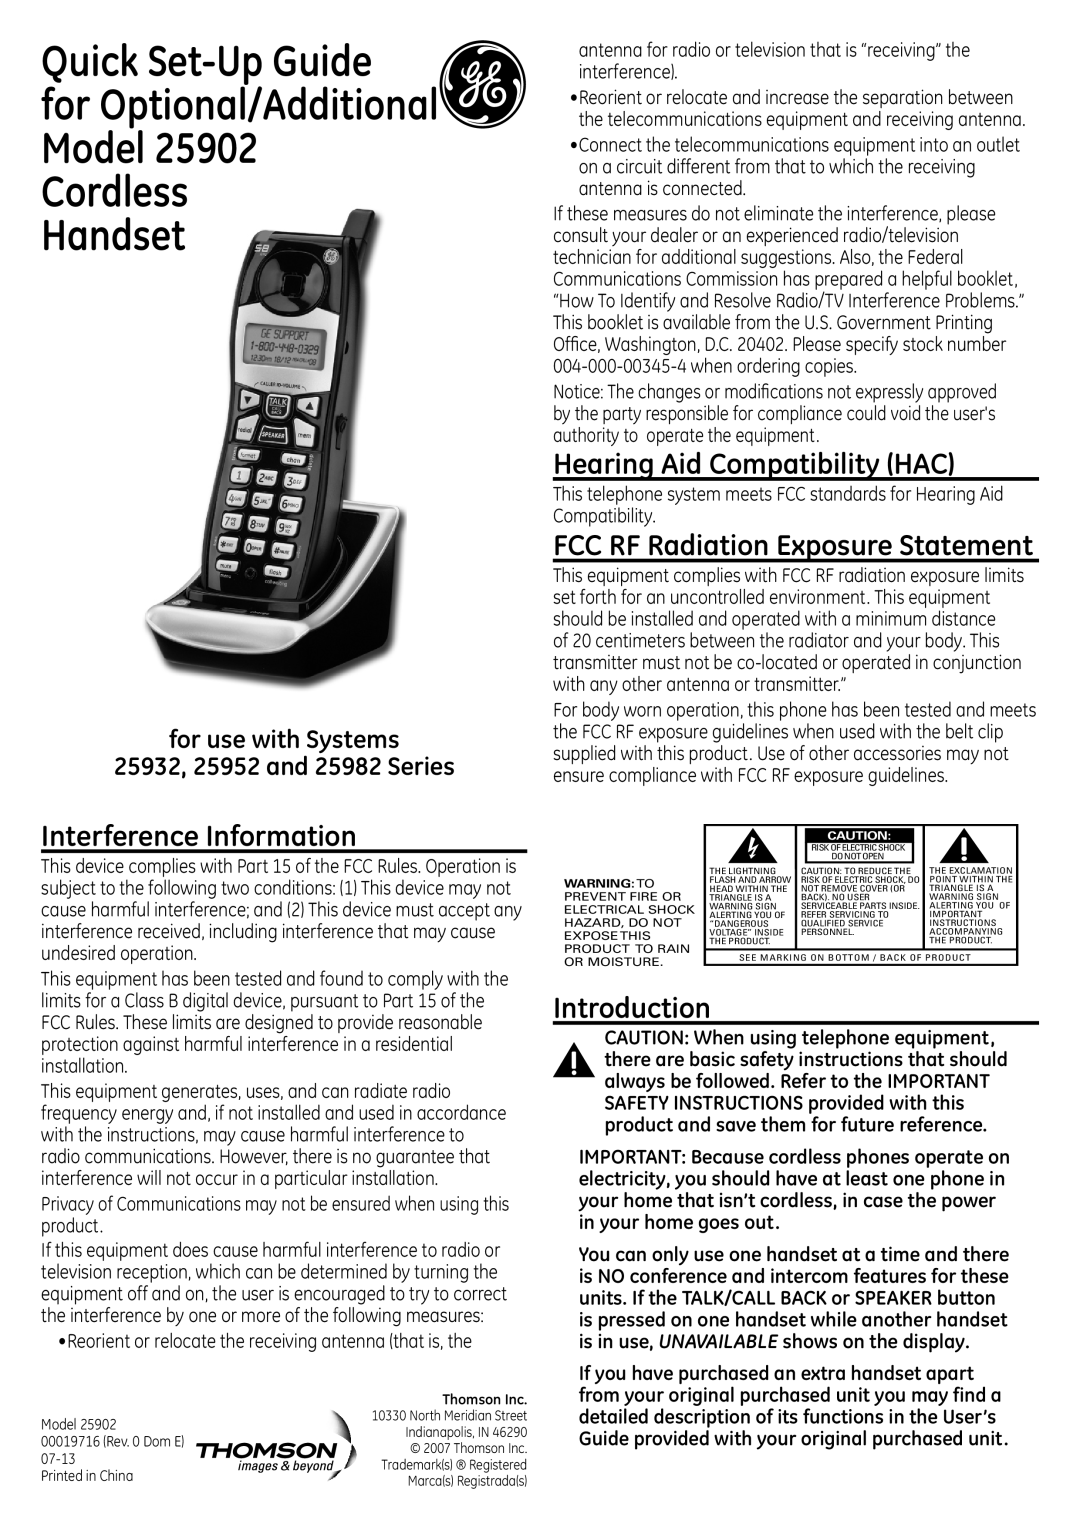 GE 00019716, 25902 setup guide Interference Information, Hearing Aid Compatibility HAC, Introduction, Handset 